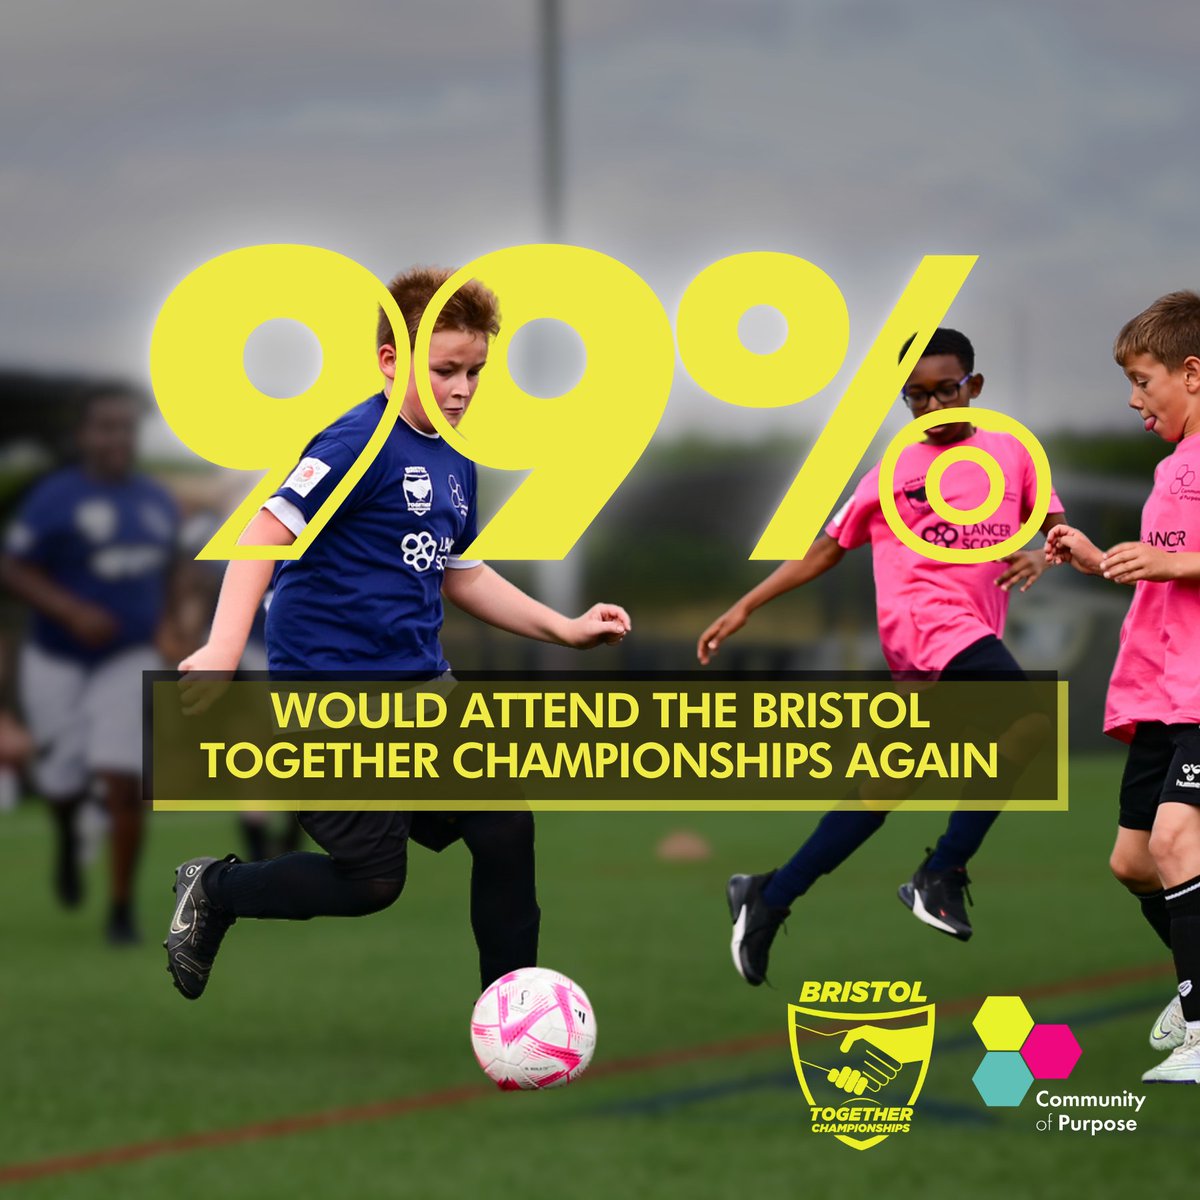 #SundayStats 99% of the young people who participated in the Bristol Together Championships said that would attend the Bristol Together Championships sessions again! #empoweringpeople #BTC #BristolTogether